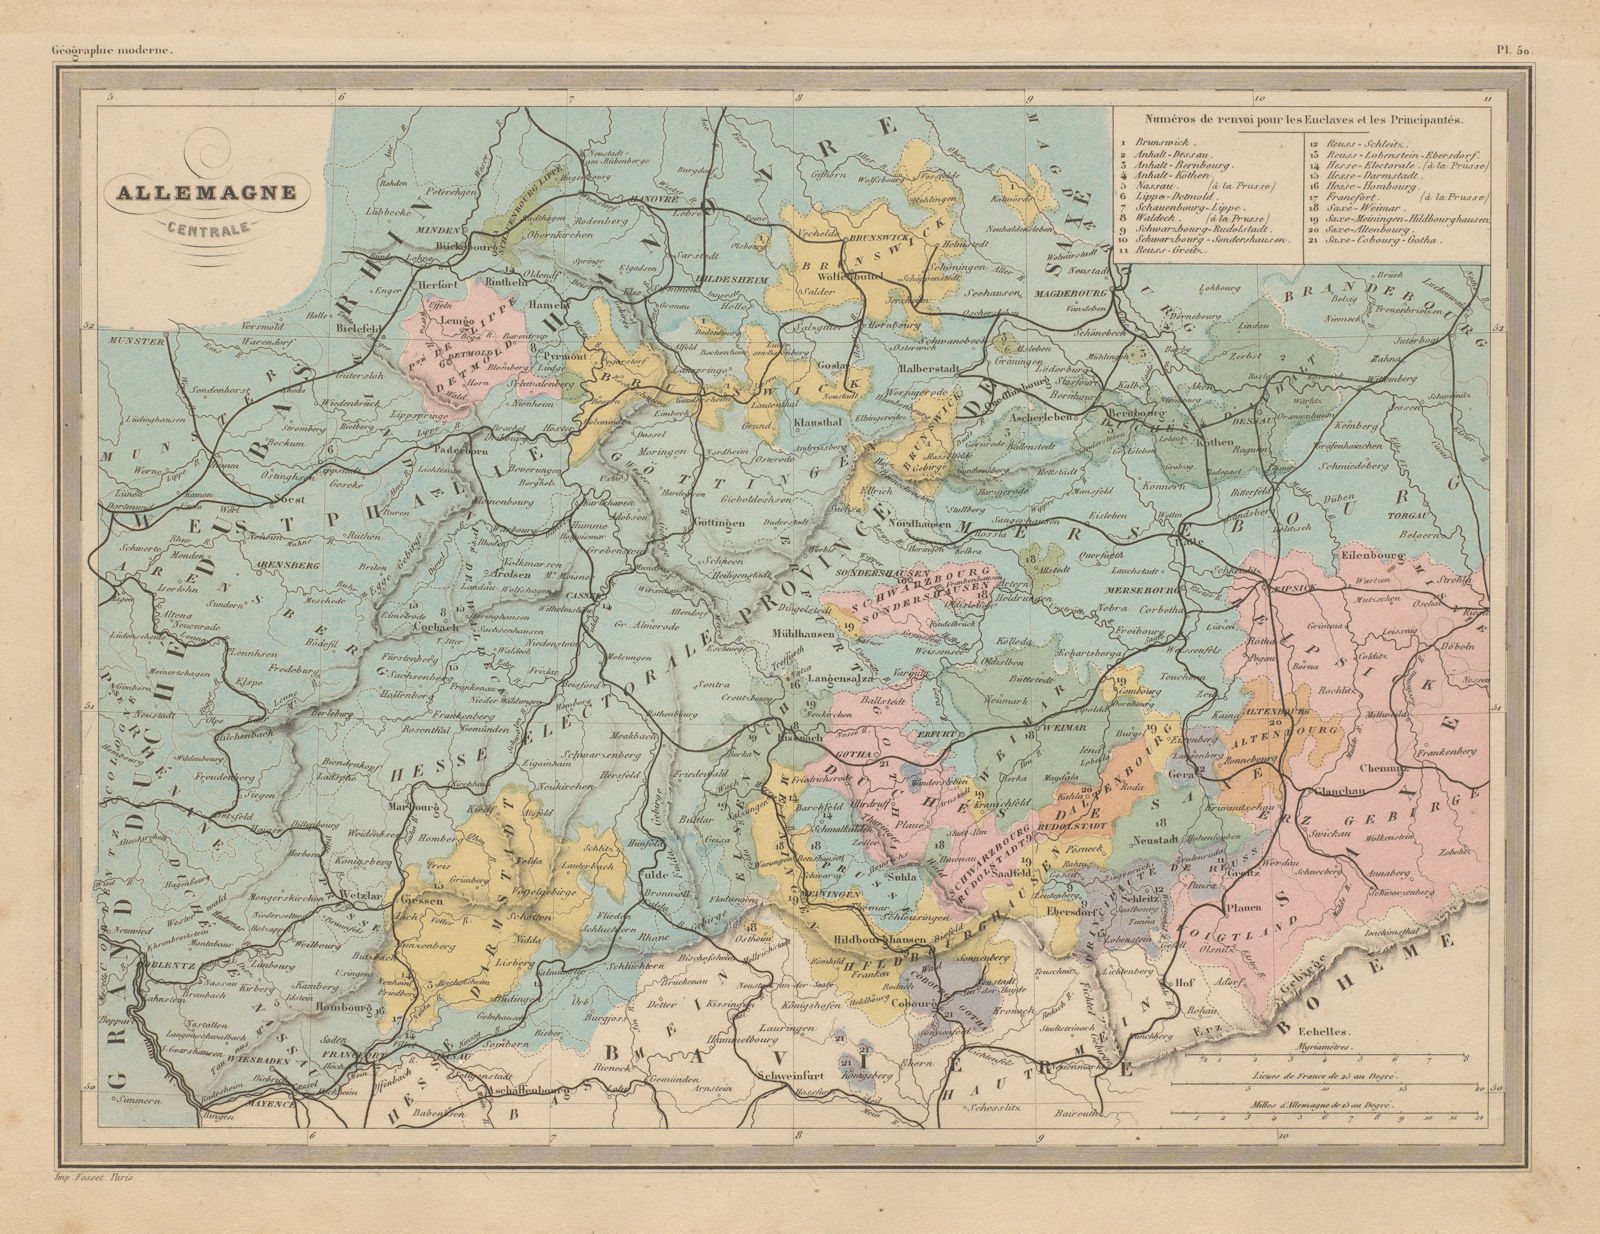 Associate Product Allemagne Centrale. Central Germany. MALTE-BRUN c1871 old antique map chart